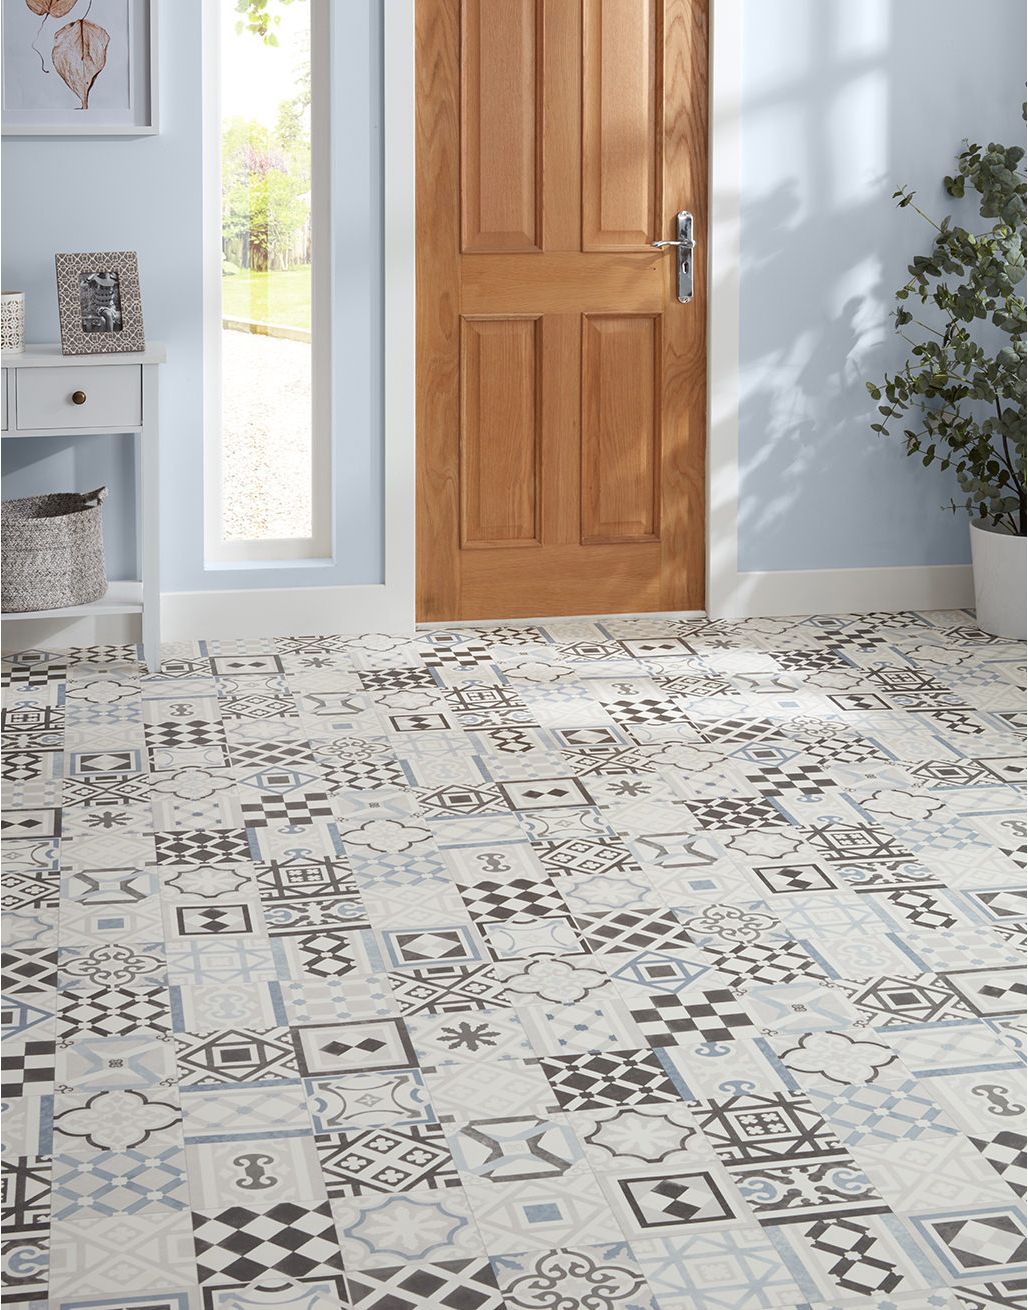 Patterned Tiles - Mosaic 1